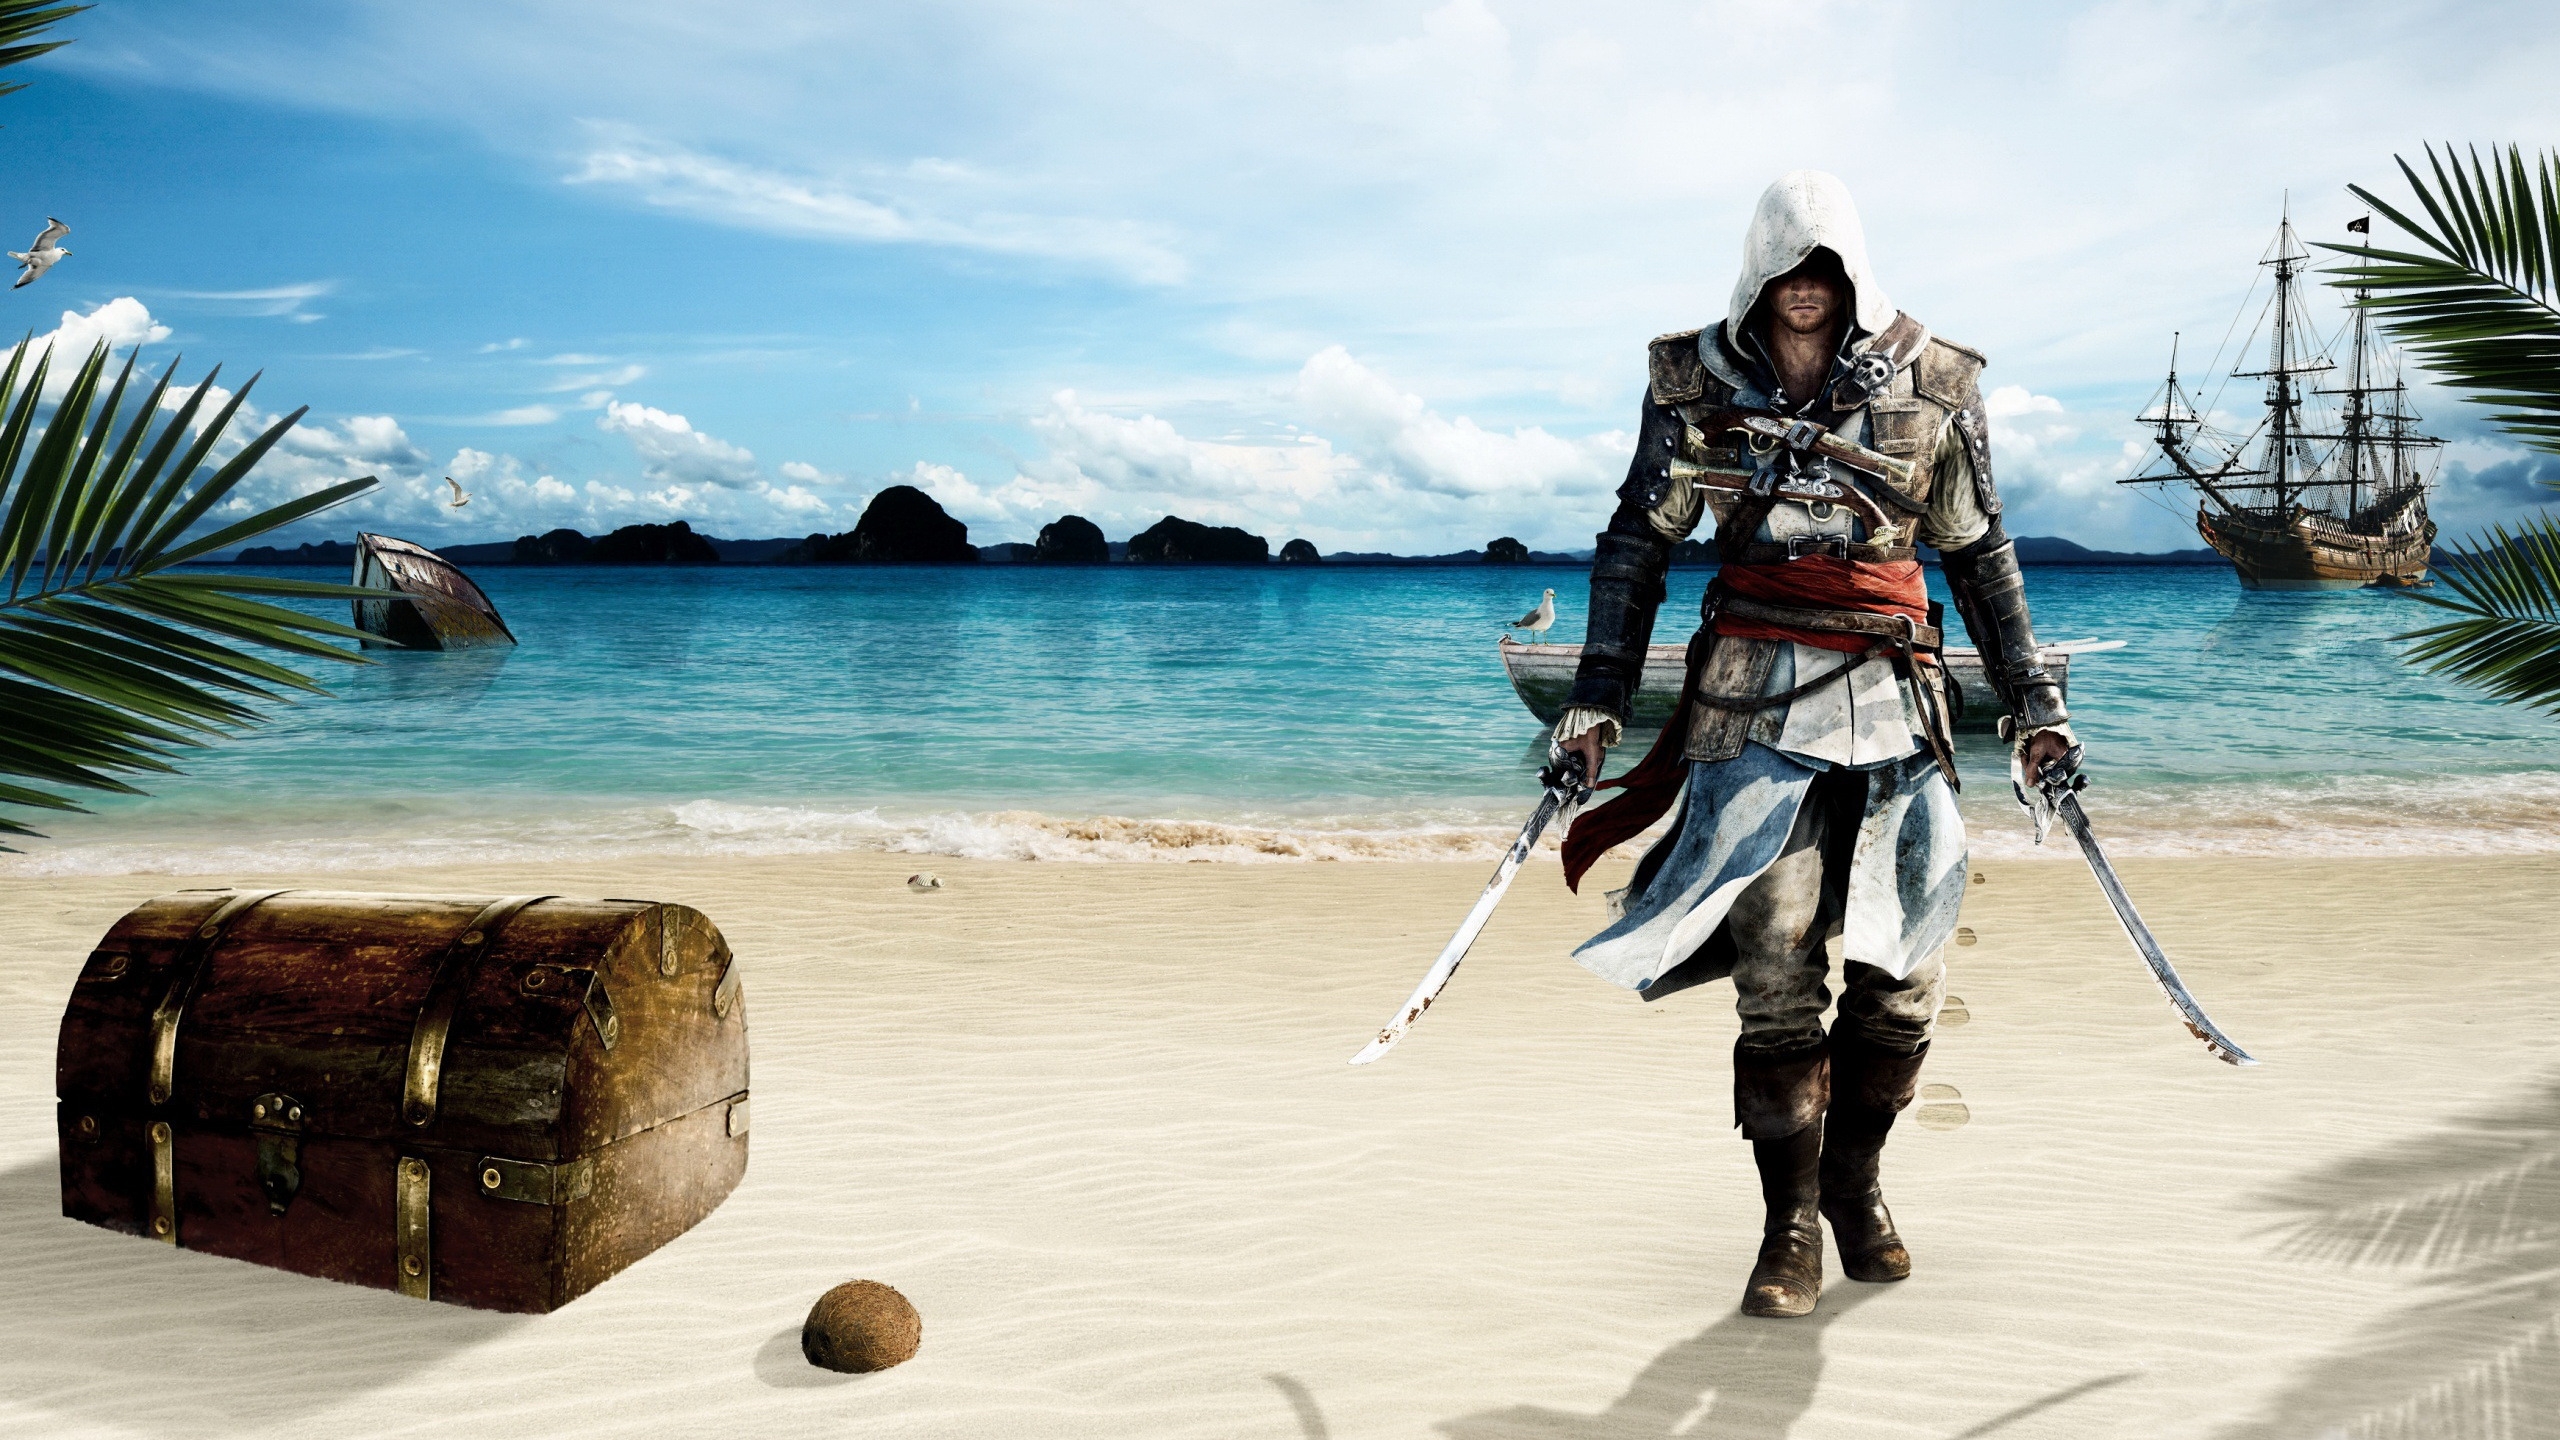 Assassin Creed 4 Beach for 2560x1440 HDTV resolution